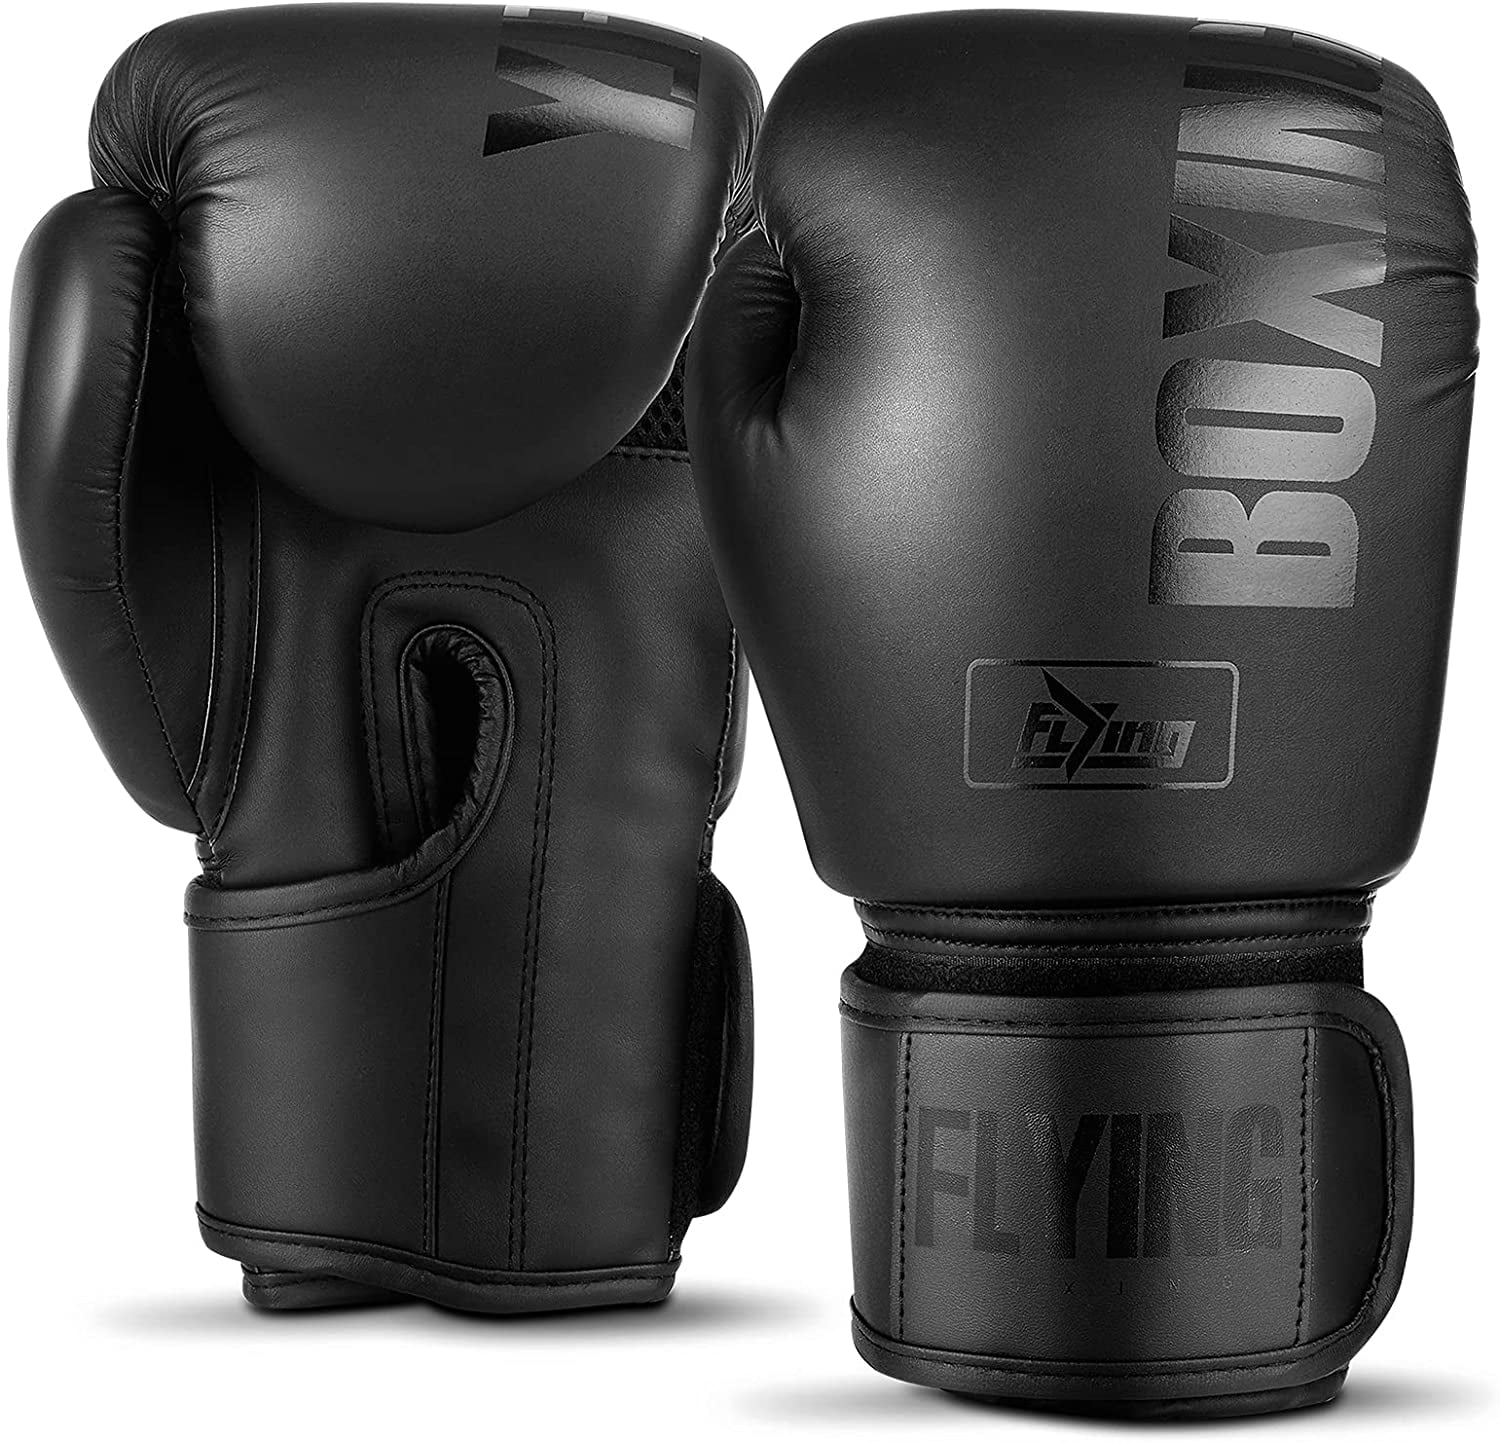 Leather MMA Martial Arts Gloves Training Boxing Body Combat Punch Bag Kickboxing 